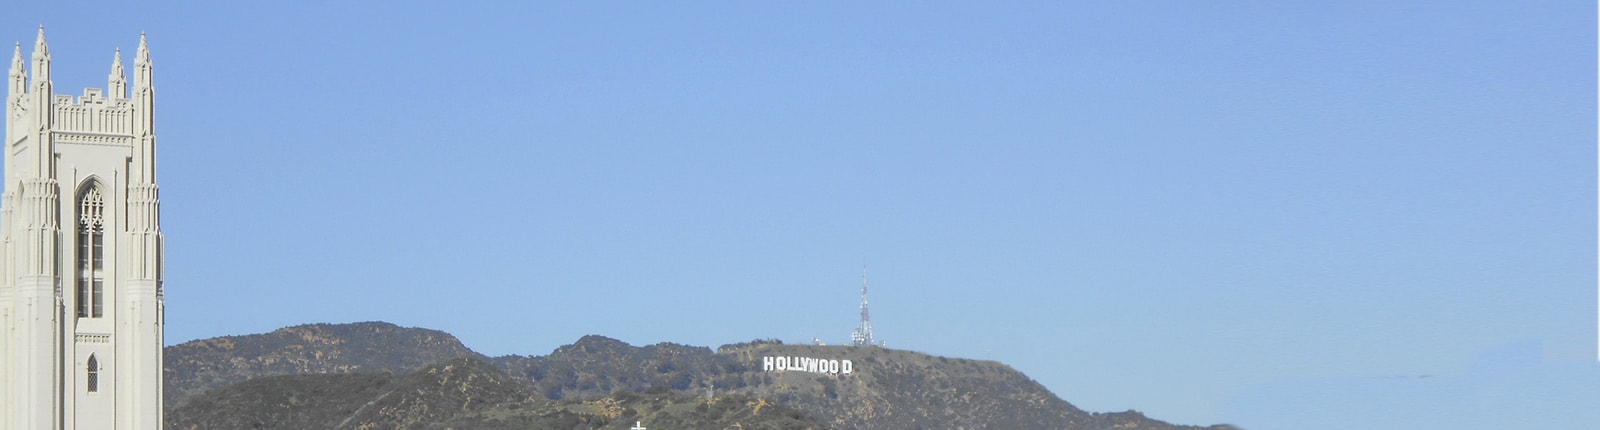 The famous Hollywood sign perched on the hillside in Los Angeles